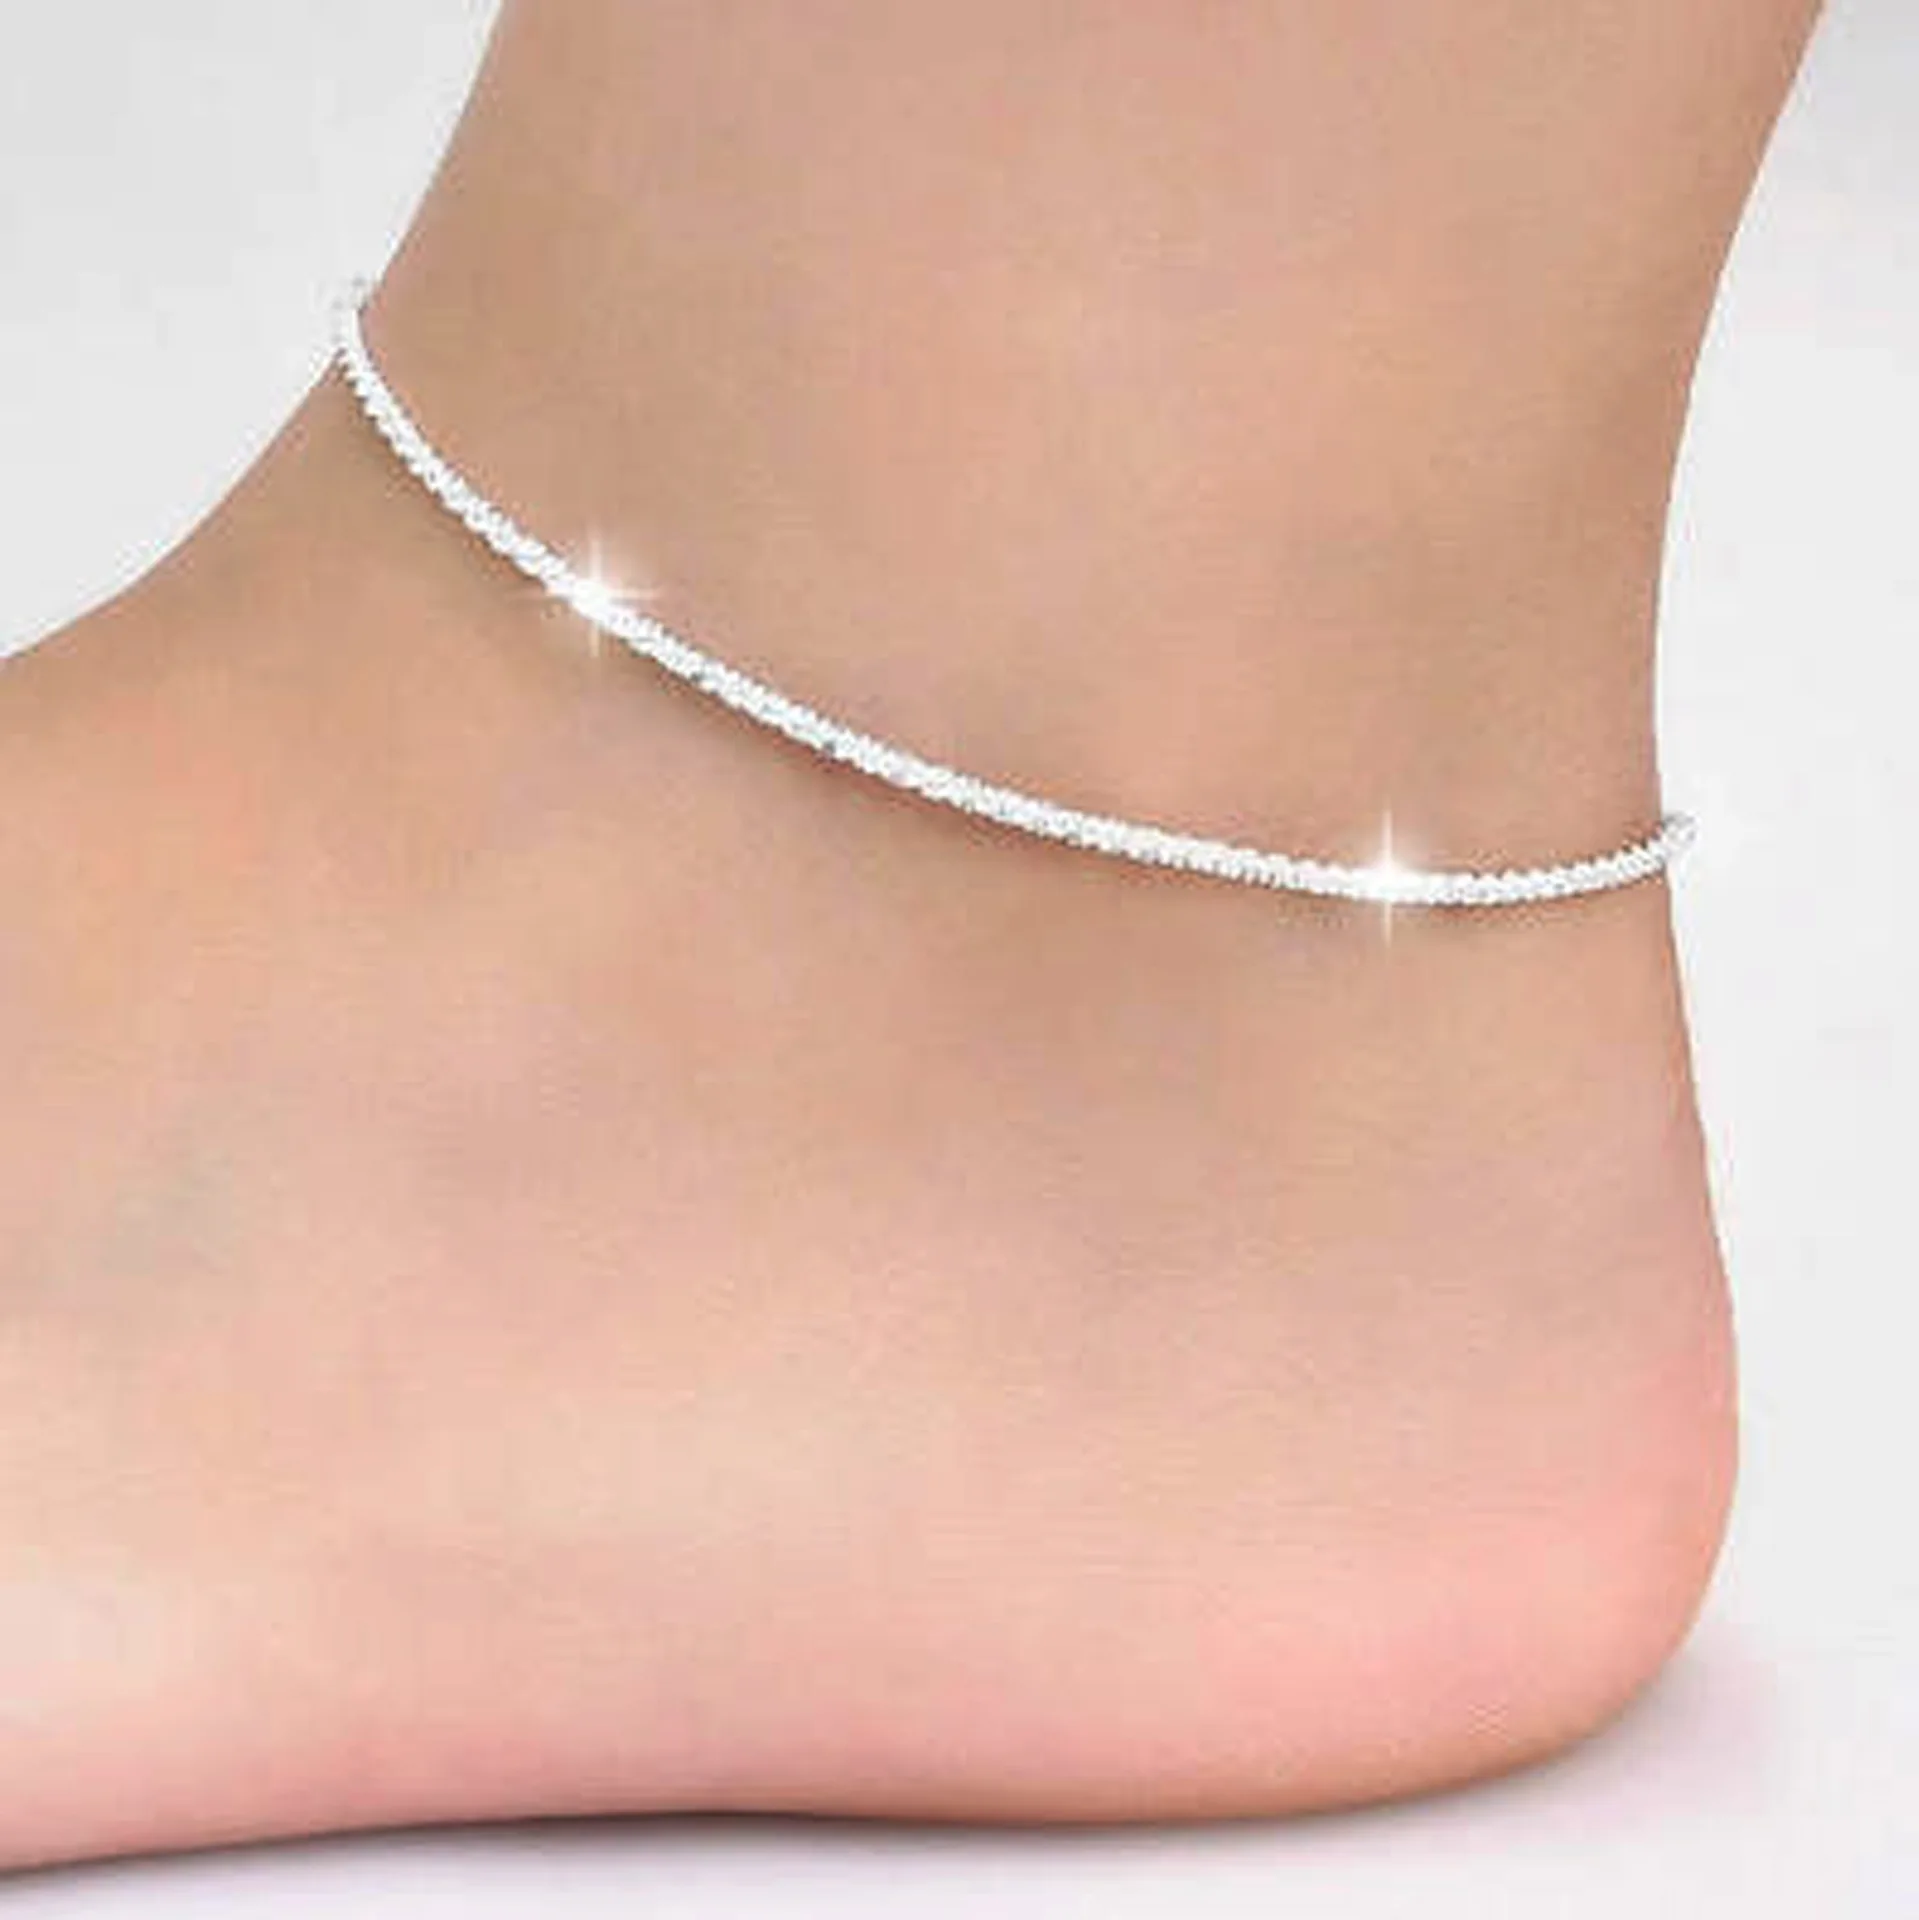 

2021 Jewelry Leg Bracelet Barefoot Tobillera de Prata Thin stamped silver plated Shiny Chains Anklet For Women Girls Friend Foot